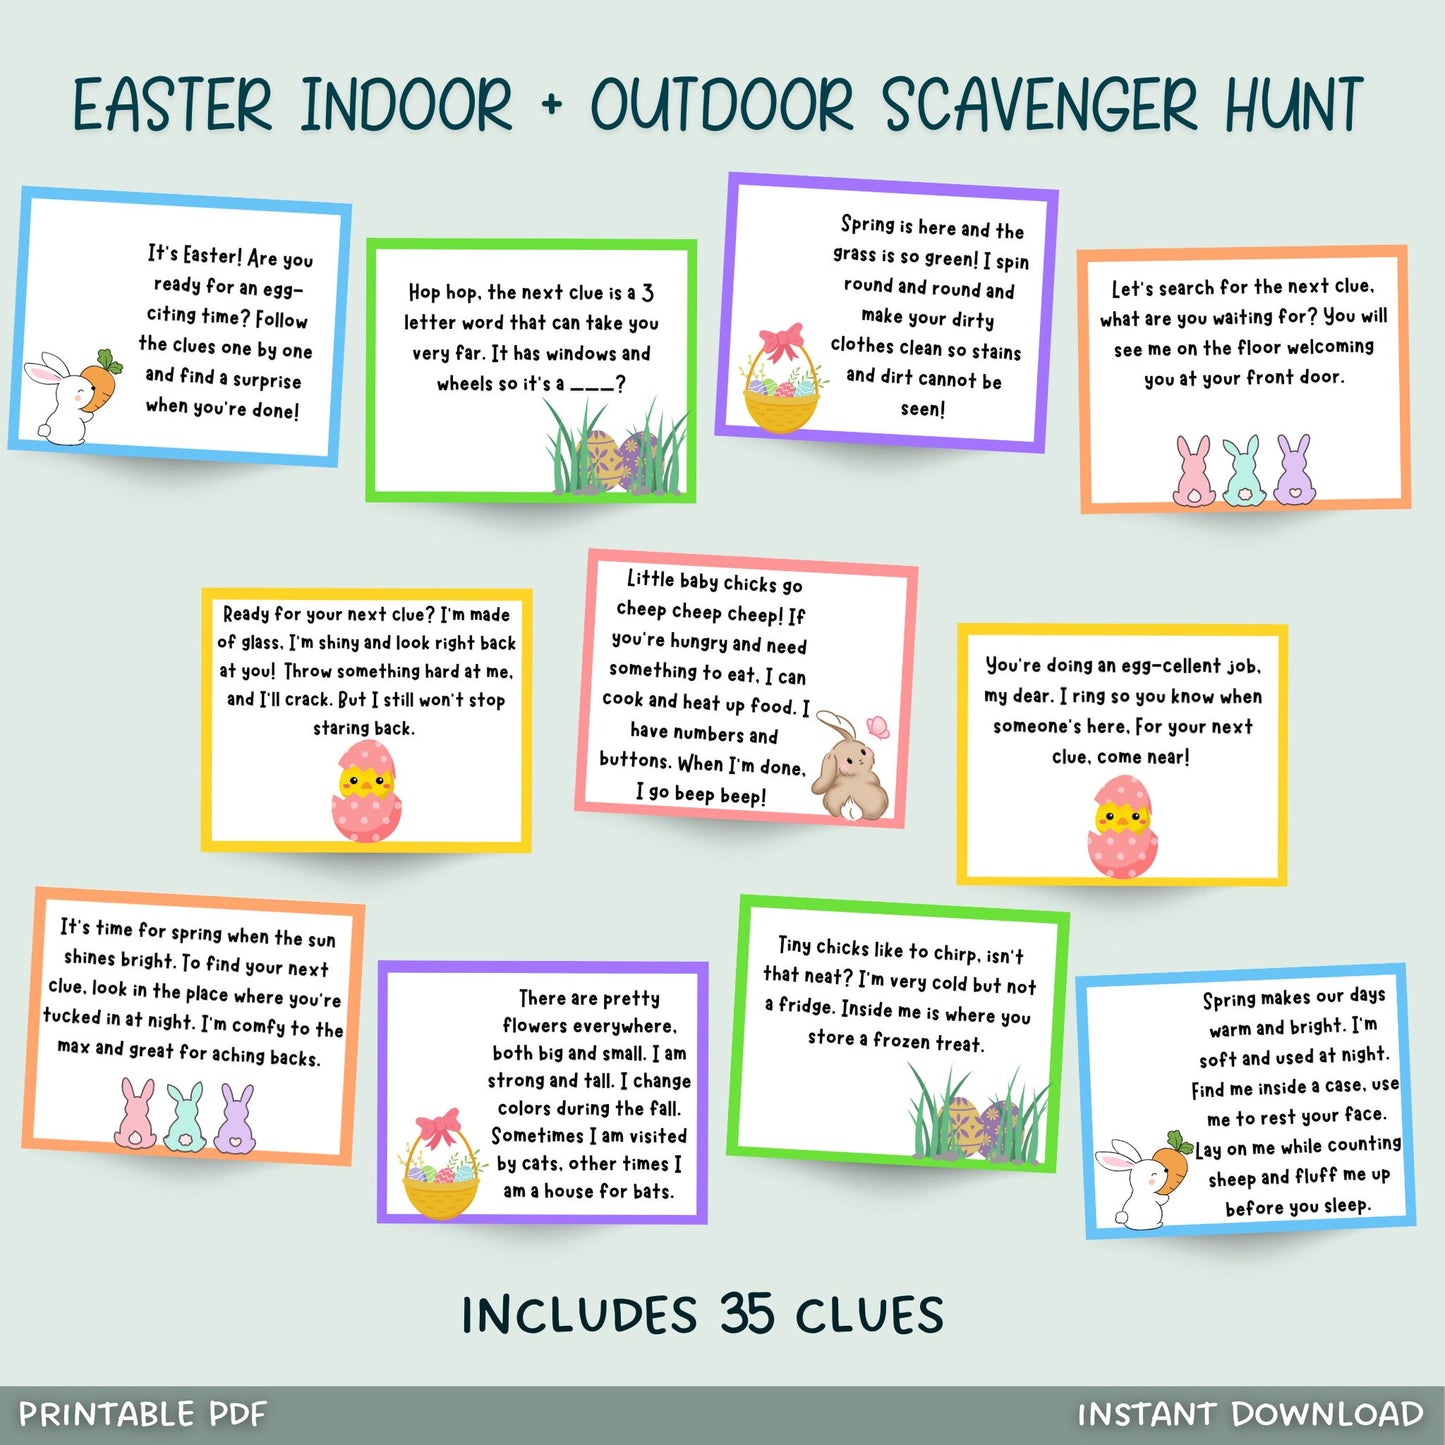 This indoor and outdoor Easter scavenger hunt is printable & an instant download! Send your kids on this fun mission searching all around with these 35 clues. Hide an easter egg with each clue or include a special present at the end! Just print & use